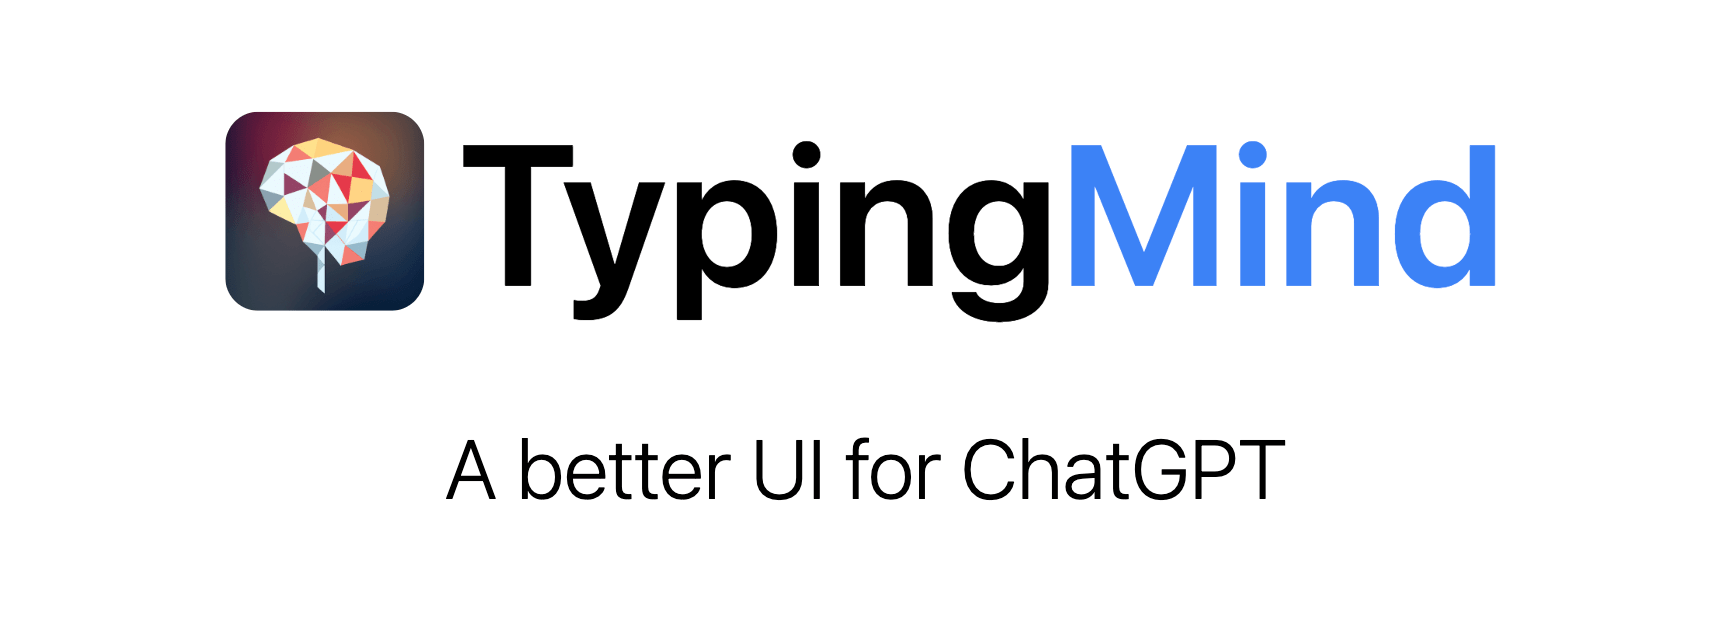 Typing Mind - A better UI for ChatGPT